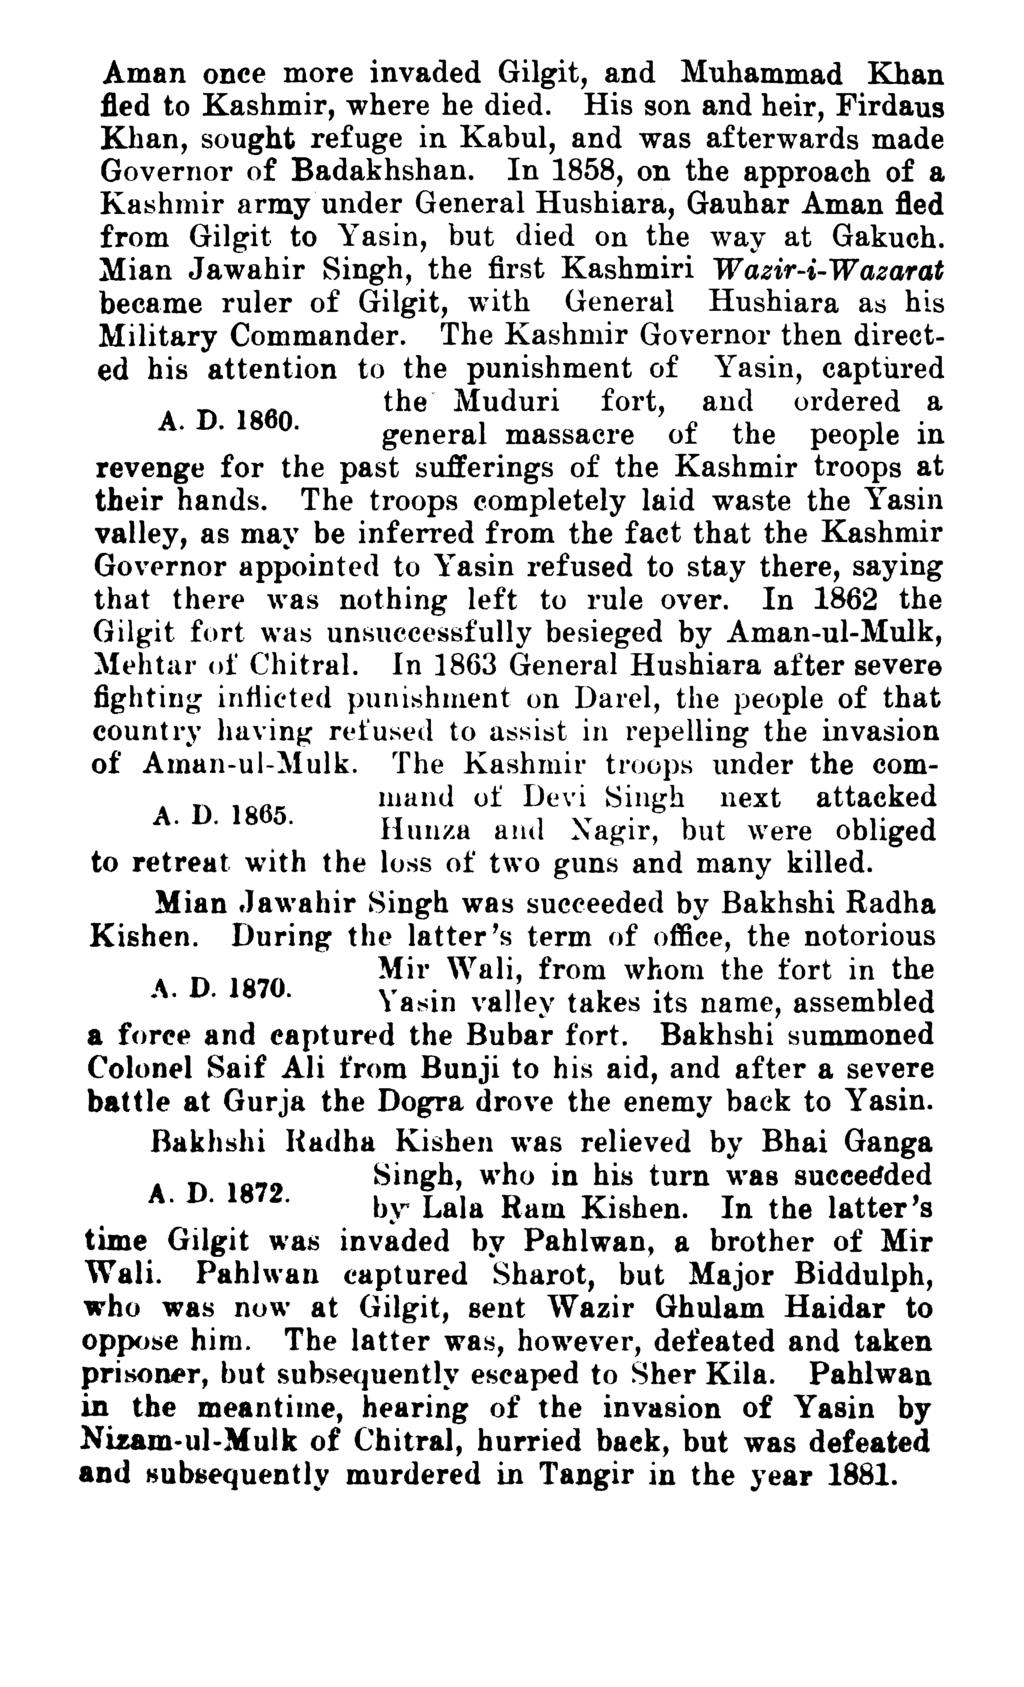 Aman once more invaded Gilgit, and Muhammad Khan fled to Kashmir, where he died. His son and heir, Firdaus Khan, sought refuge in Kabul, and was afterwards made Governor of Badakhshan.